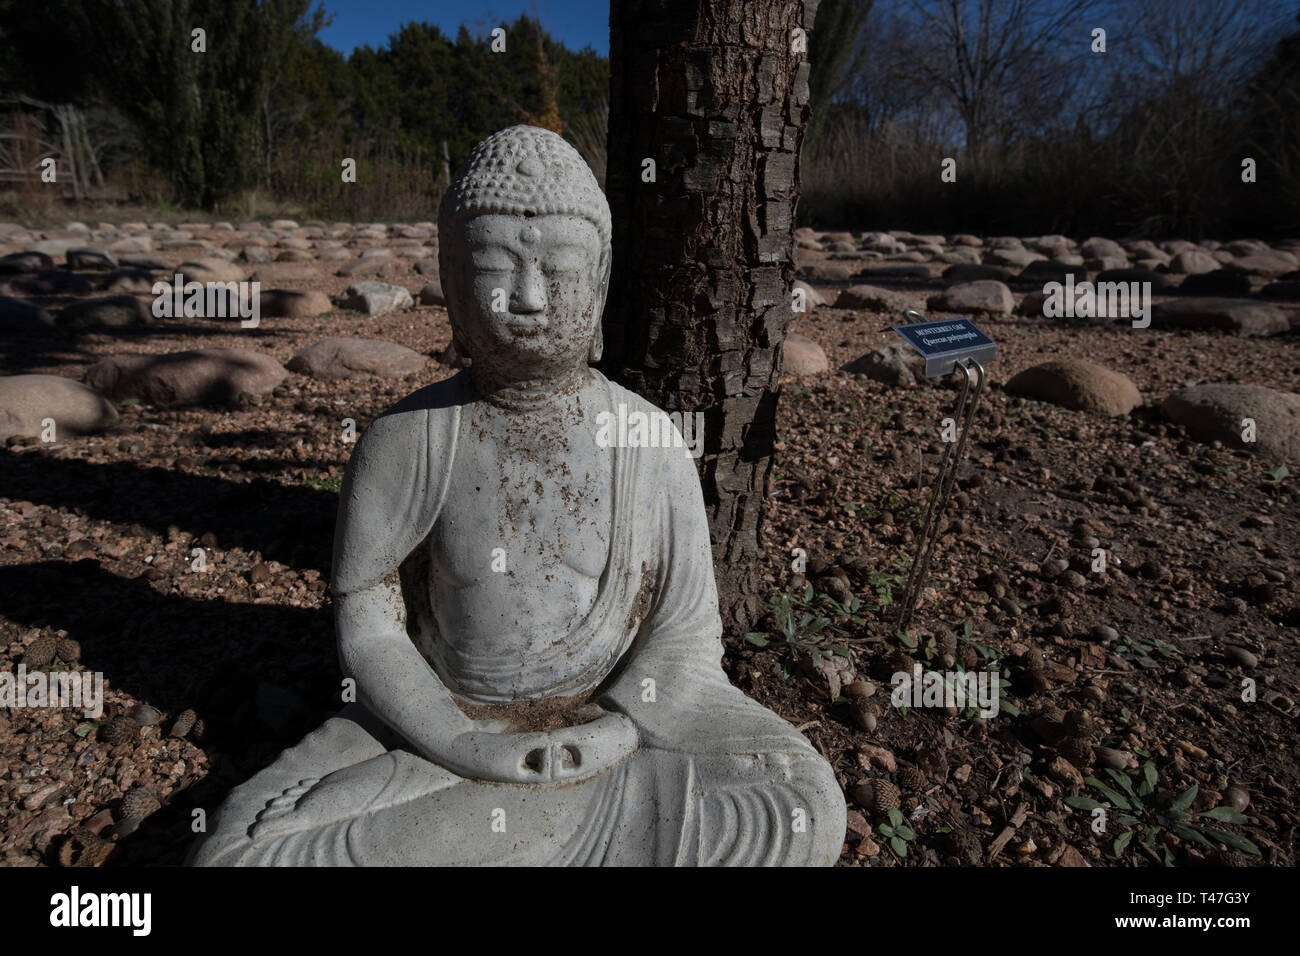 A statue of the Buddha meditating in a Japanese-inspired Zen Garden in Austin, Texas Stock Photo